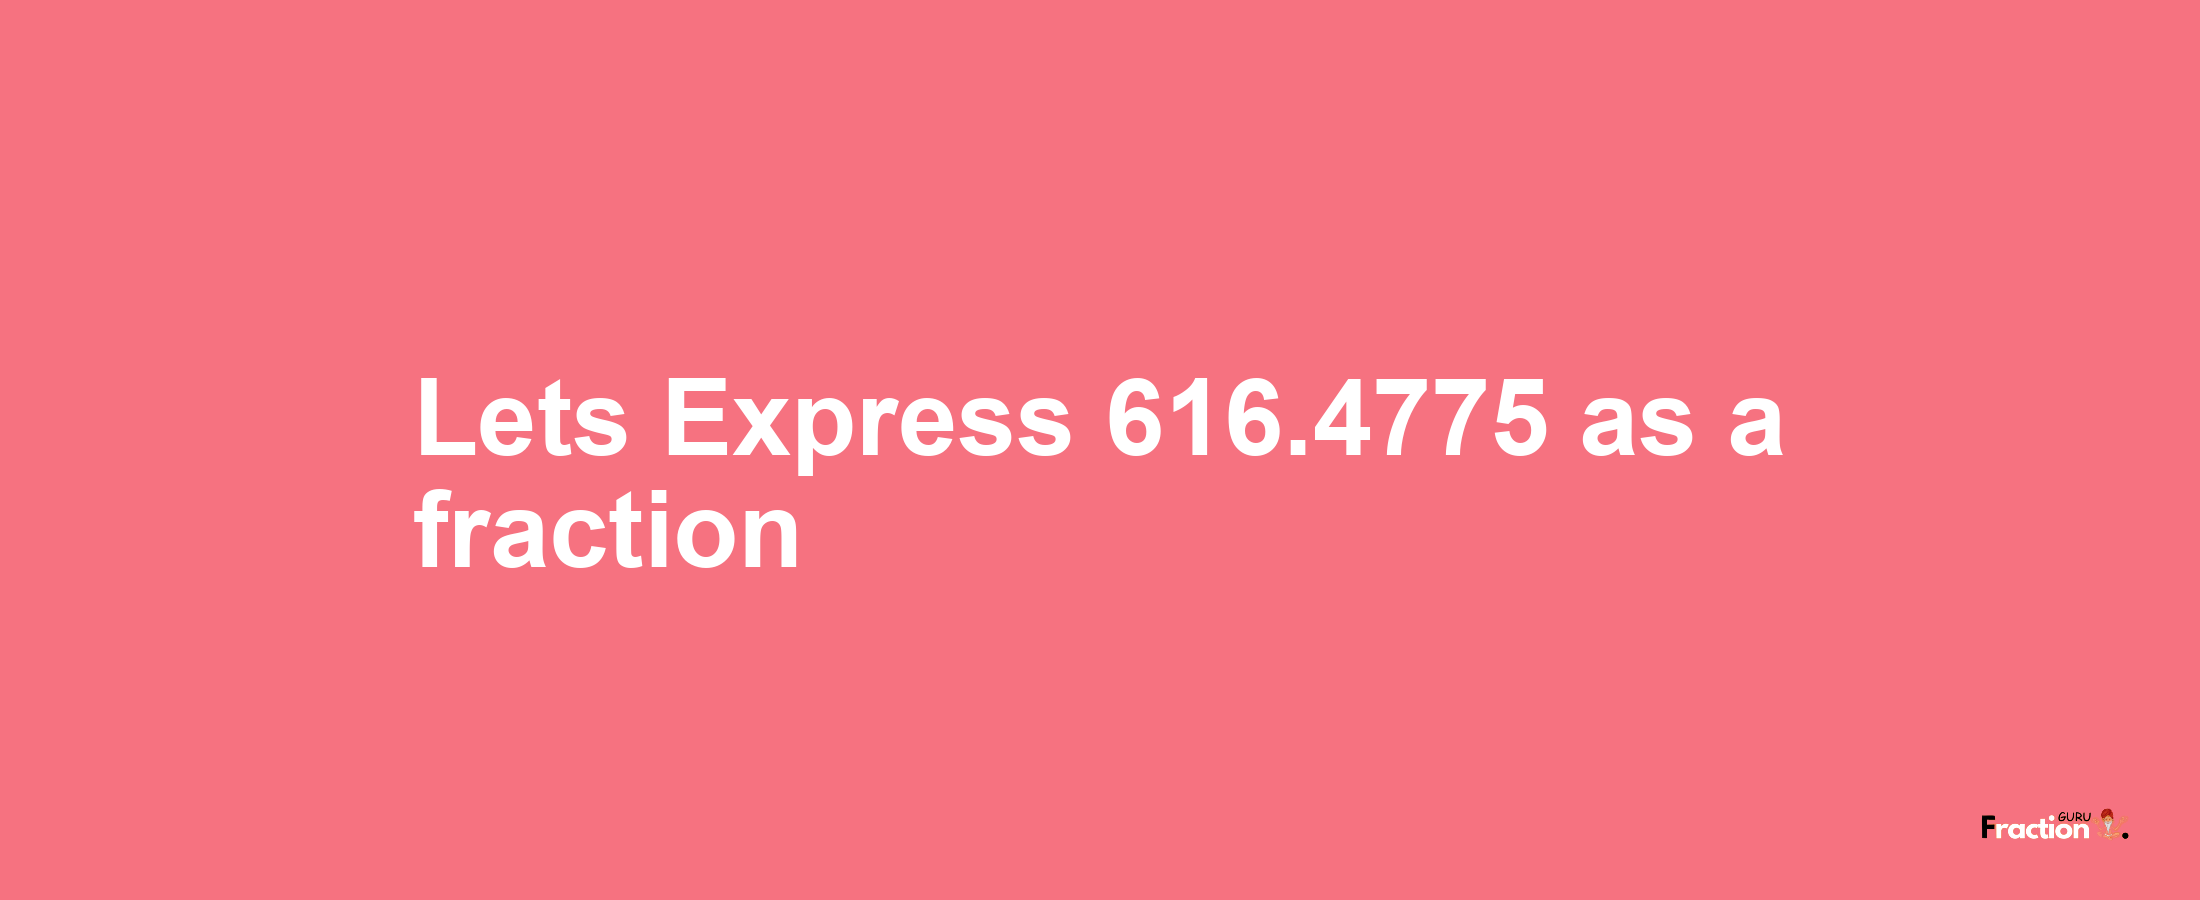 Lets Express 616.4775 as afraction